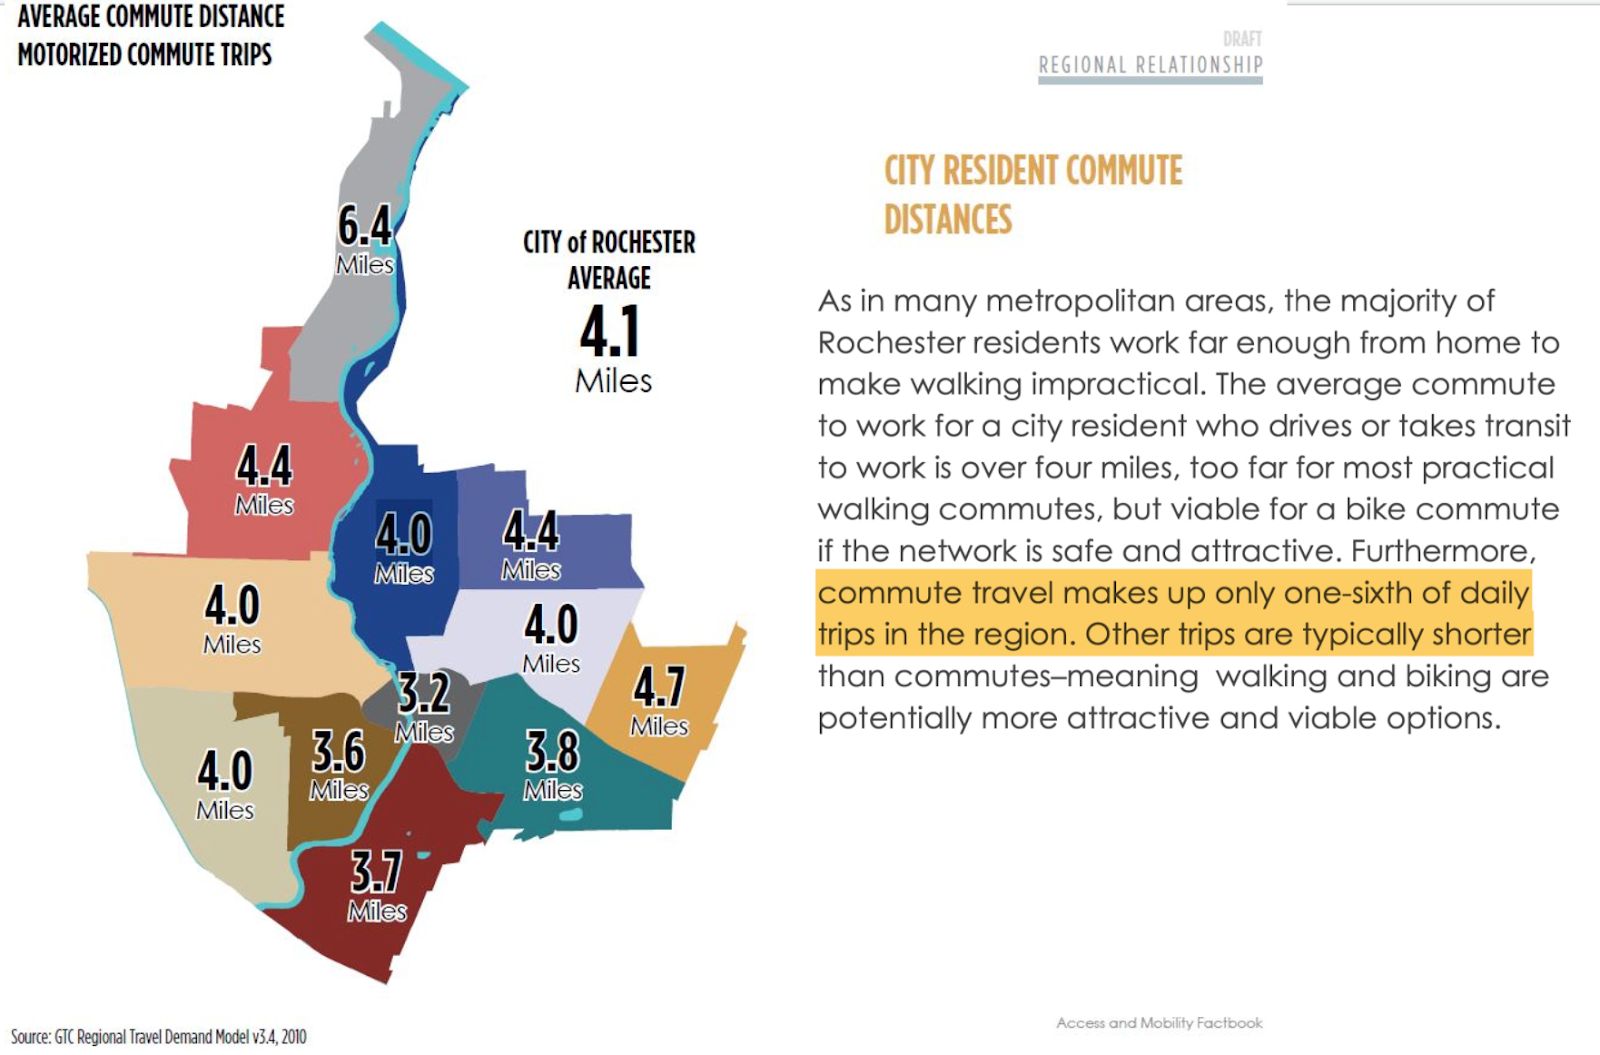 Average Commute Distance graphic for Rochester, NY. Average is 4.1 miles. Highlighted portion: "commute travel makes up only one-sixth of daily trips in the region. Other trips are typically shorter"